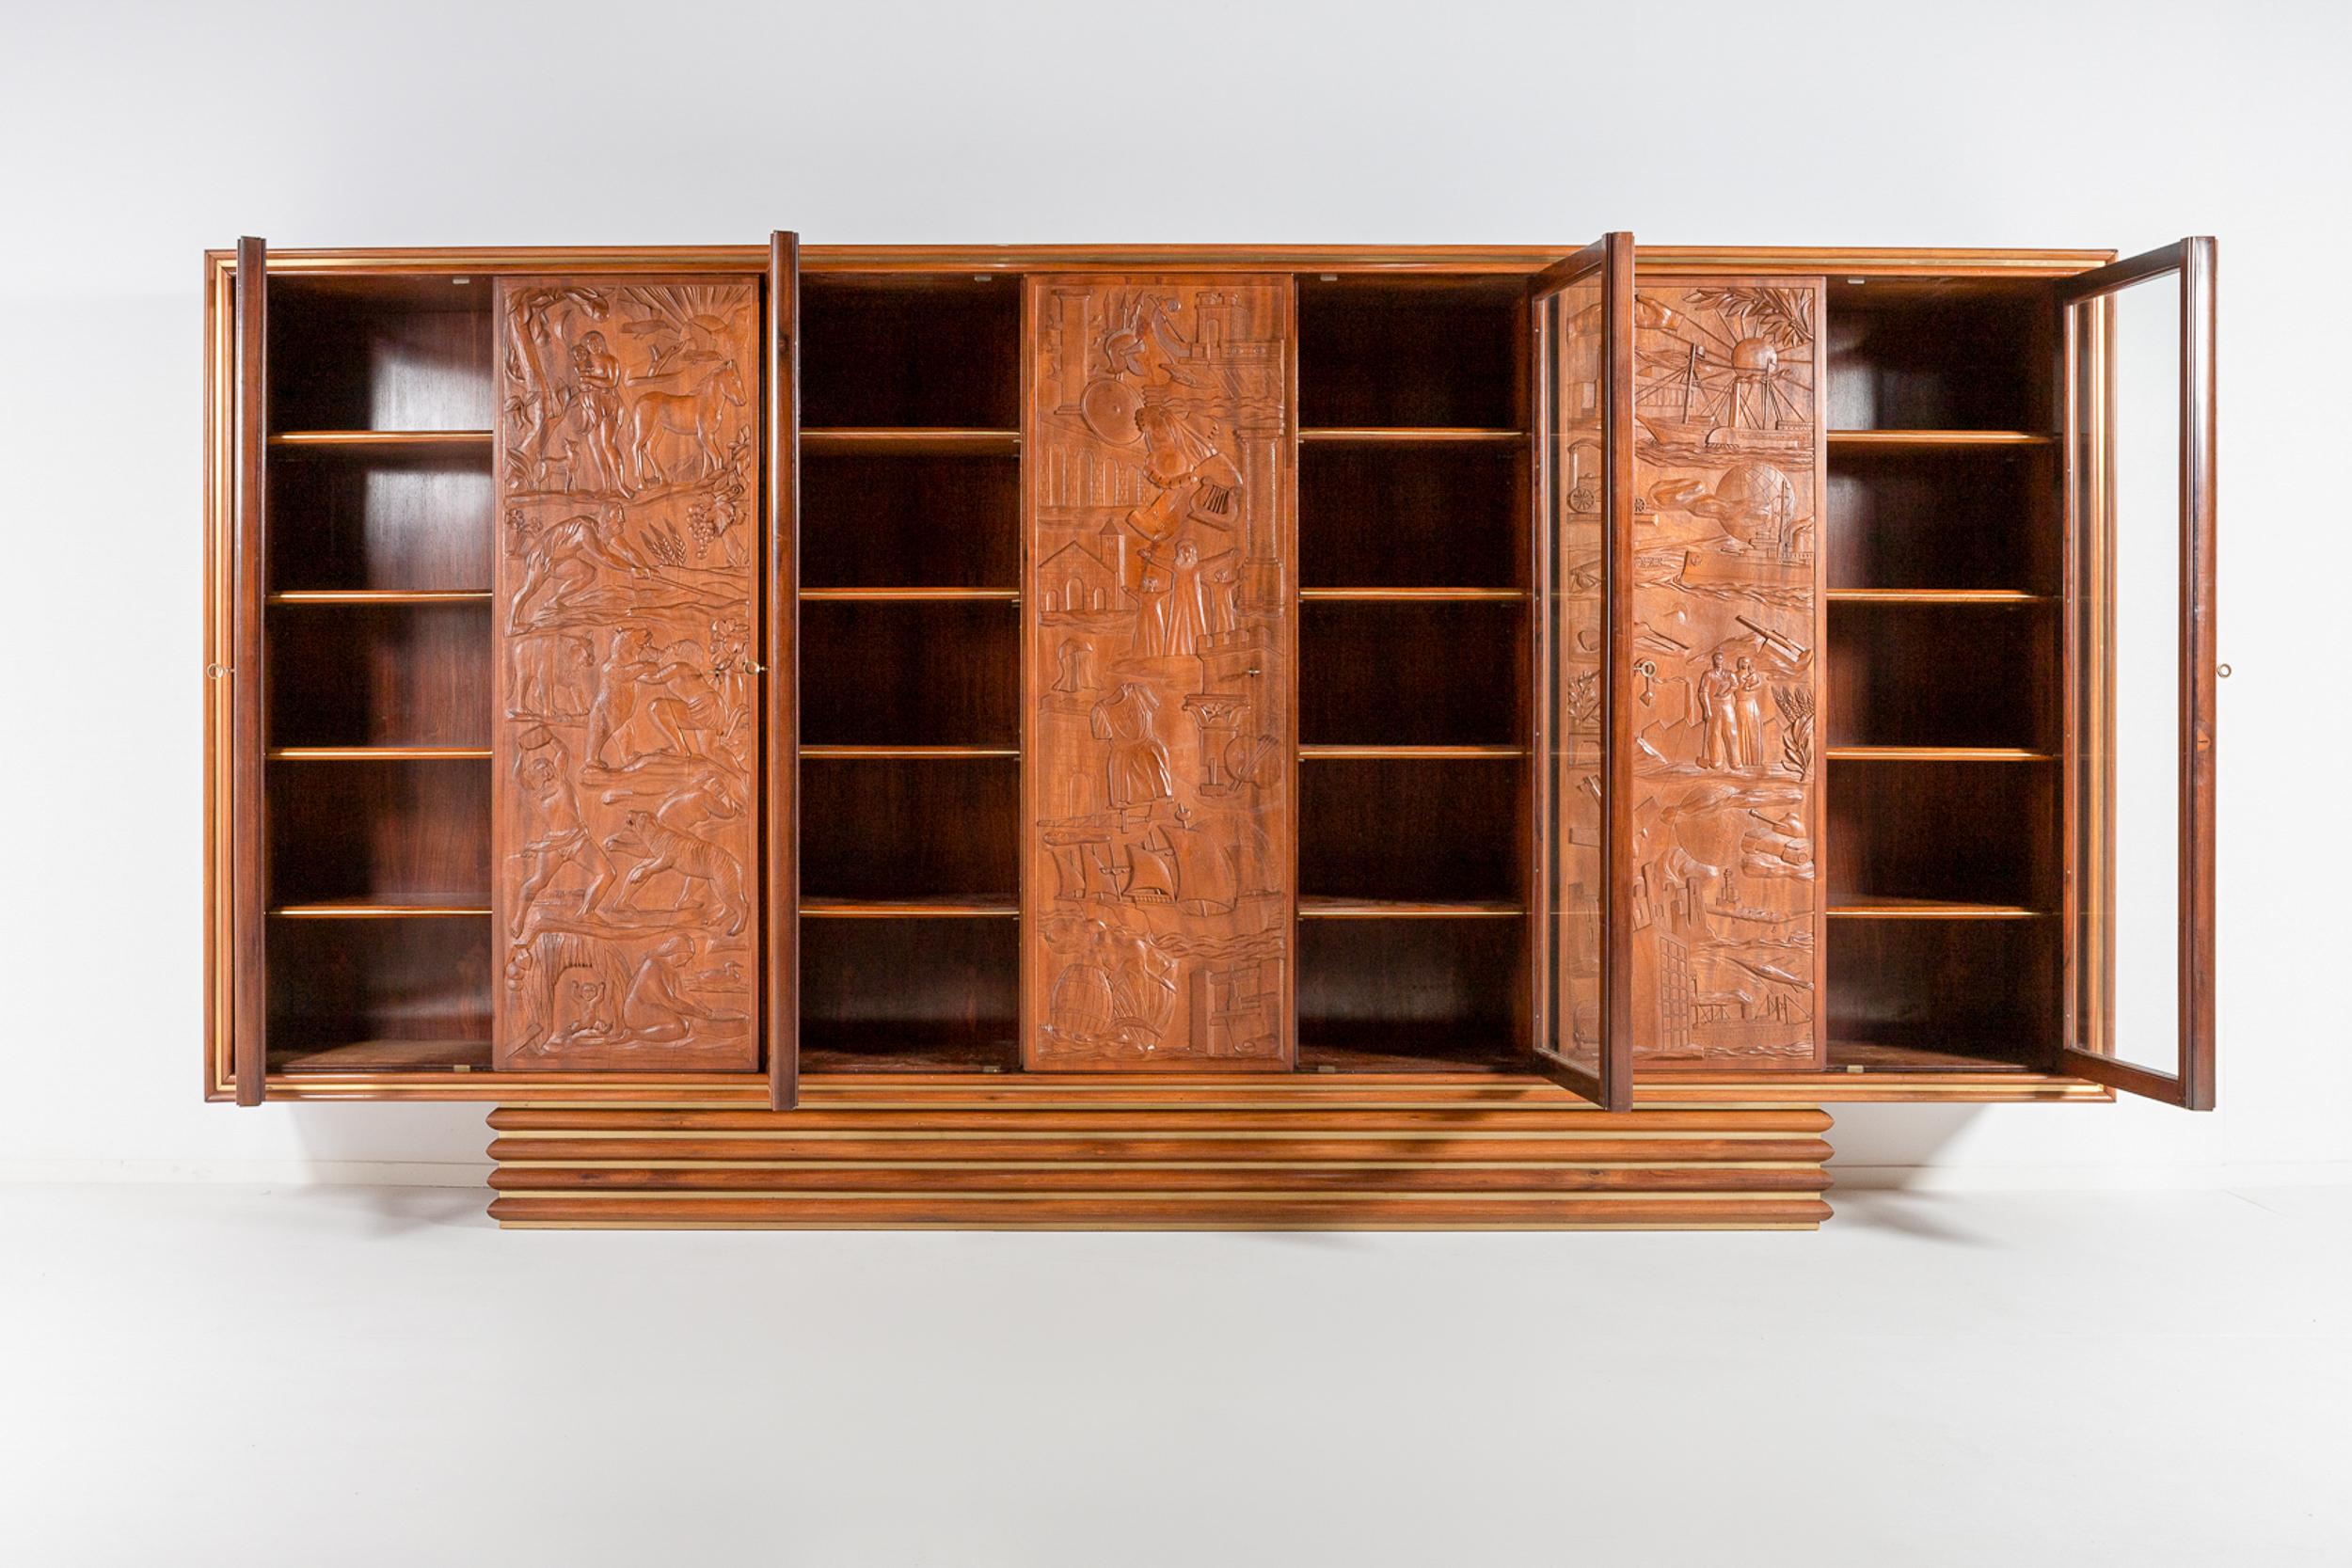 A superb massive Italian walnut and rosewood display cabinet. 
This sideboard features carved doors in walnut and glass doors with delicate rosewood frames.
The interior is completely finished in wonderful bookmarked rosewood veneer.
All shelves are